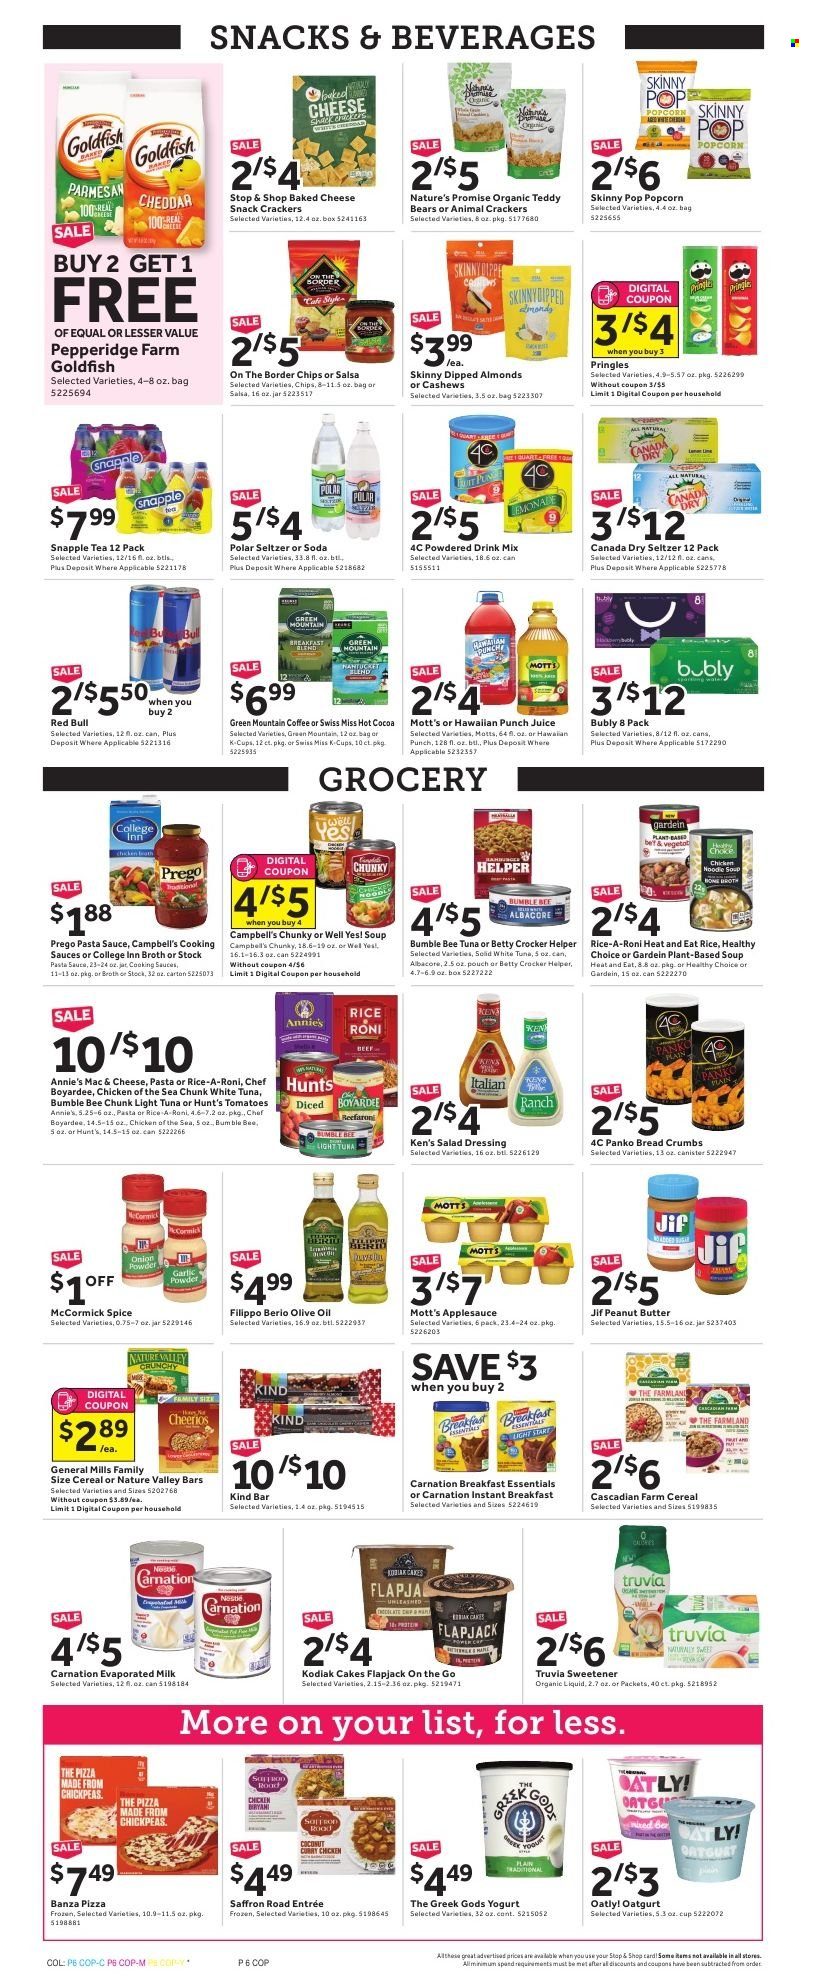 thumbnail - Stop & Shop Flyer - 01/07/2022 - 01/13/2022 - Sales products - cake, Nature’s Promise, breadcrumbs, panko breadcrumbs, Mott's, Campbell's, pizza, pasta sauce, soup, Bumble Bee, Healthy Choice, Annie's, parmesan, yoghurt, Swiss Miss, evaporated milk, snack, crackers, Pringles, popcorn, Goldfish, Skinny Pop, broth, sweetener, light tuna, Chicken of the Sea, Chef Boyardee, cereals, Cheerios, Nature Valley, chickpeas, spice, salad dressing, dressing, salsa, olive oil, oil, apple sauce, peanut butter, Jif, almonds, cashews, Canada Dry, juice, Red Bull, Snapple, seltzer water, soda, powder drink, hot cocoa, tea, coffee, coffee capsules, K-Cups, Green Mountain. Page 6.